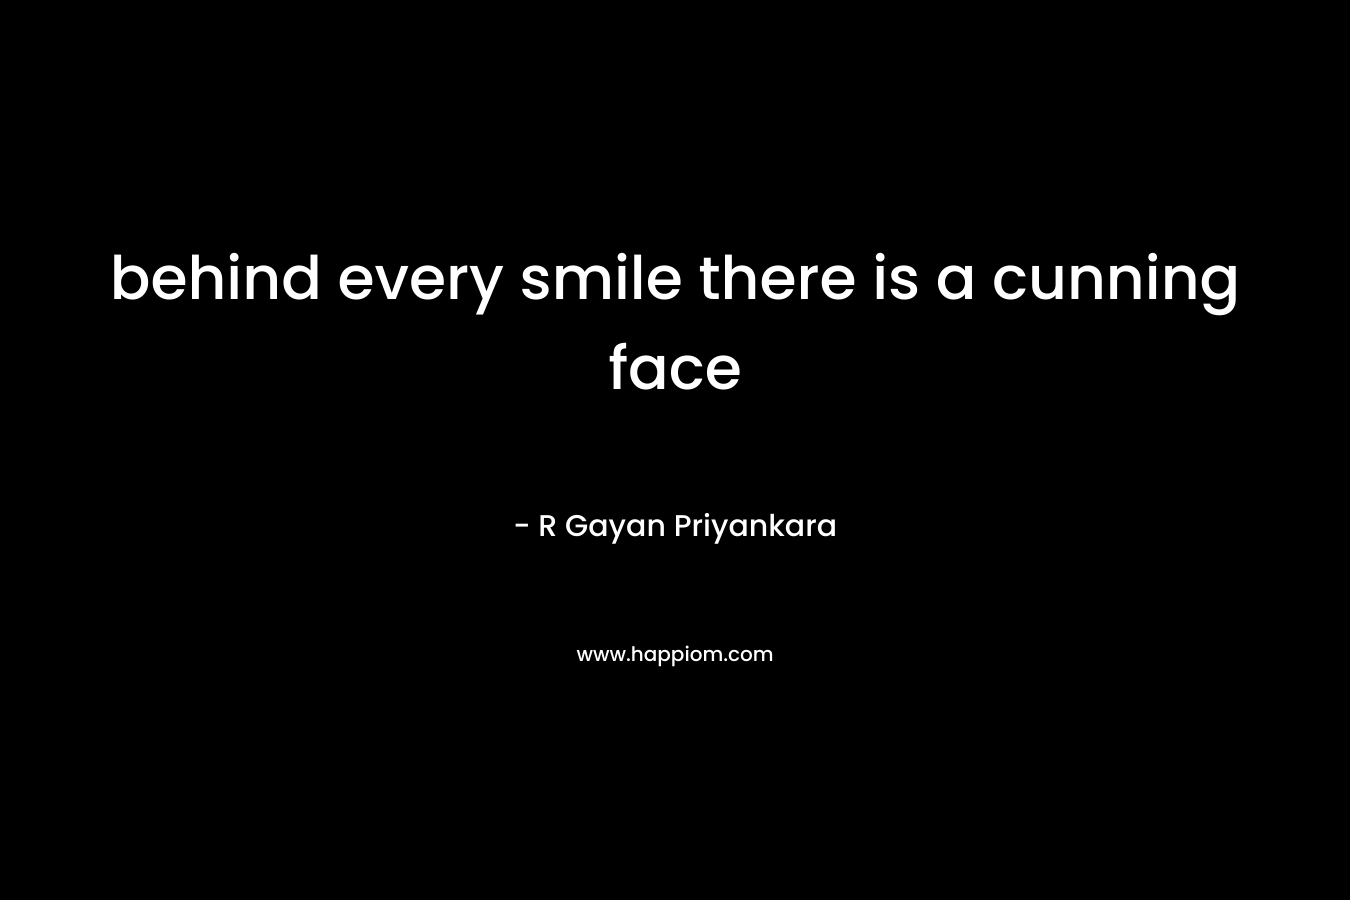 behind every smile there is a cunning face